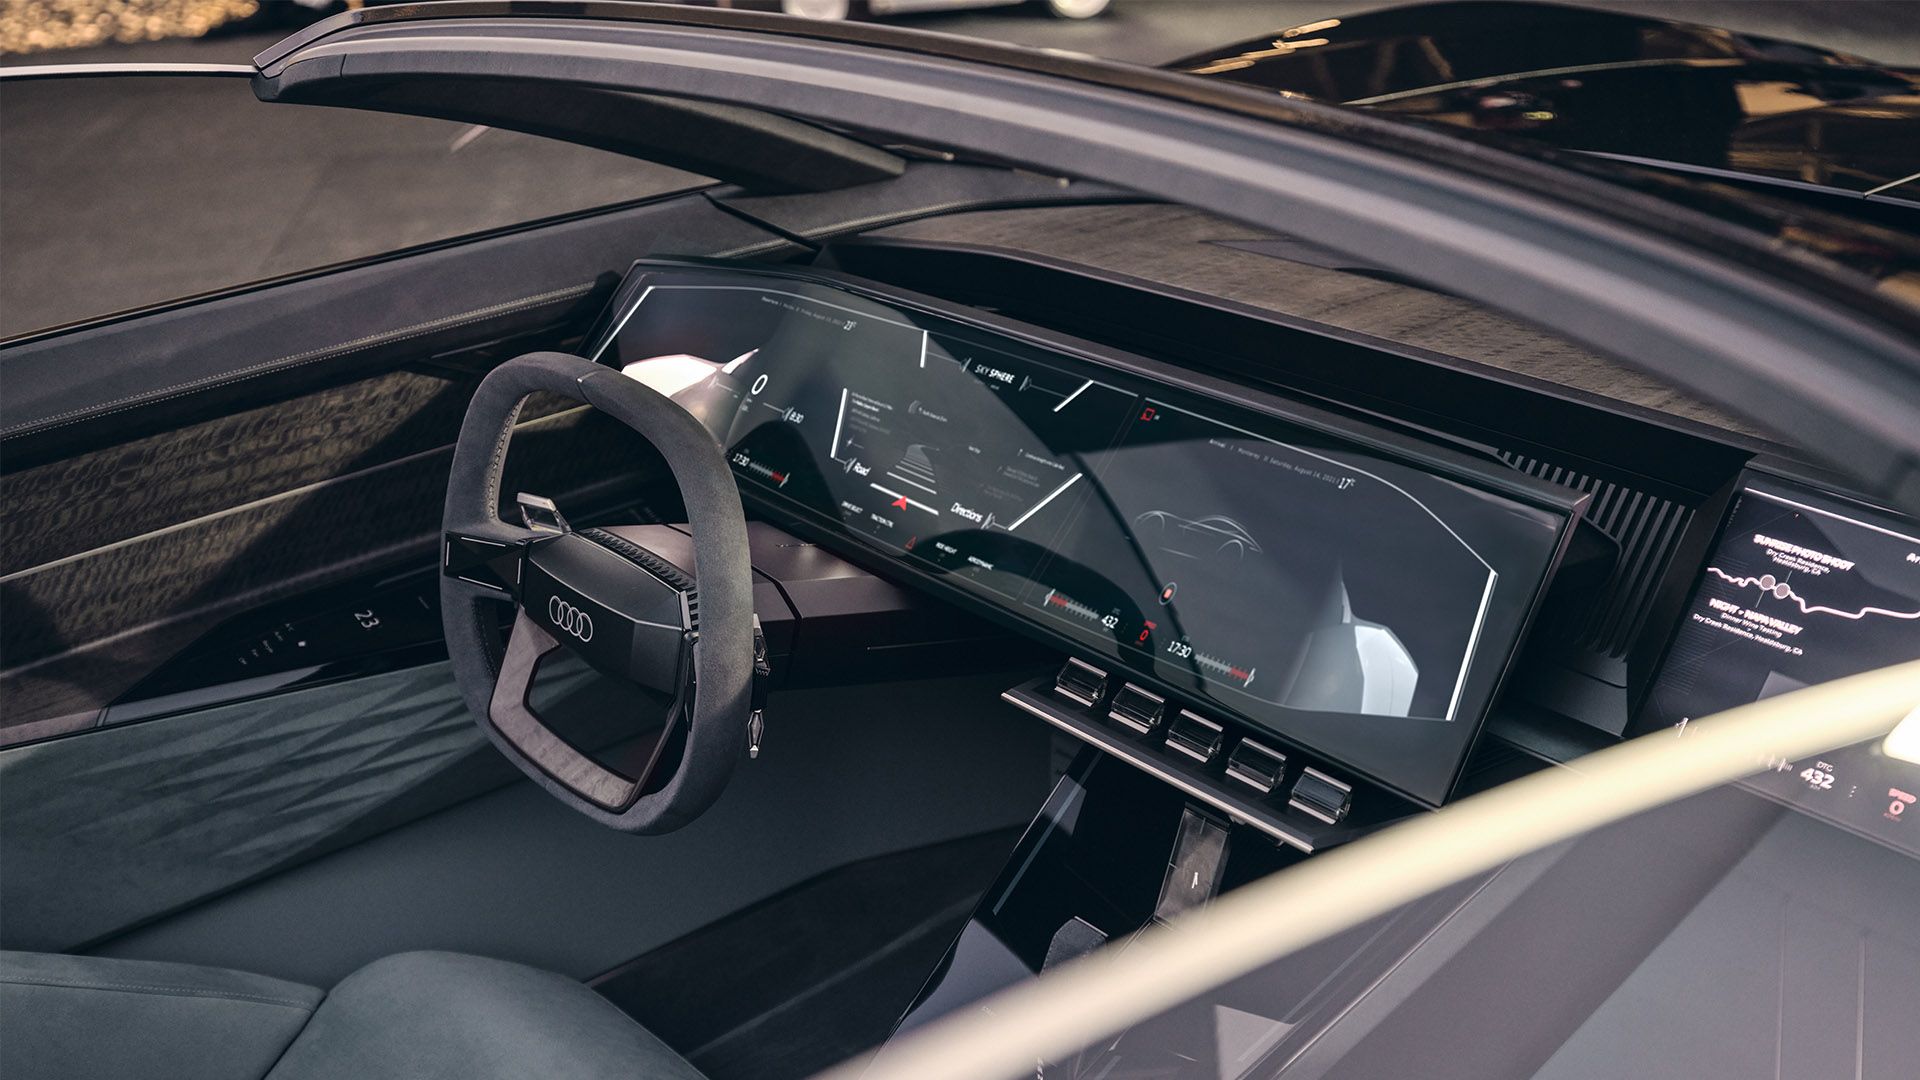 A view of the driver’s seat, pedals, steering wheel, and monitors in “Sports” mode on the Audi skysphere concept.